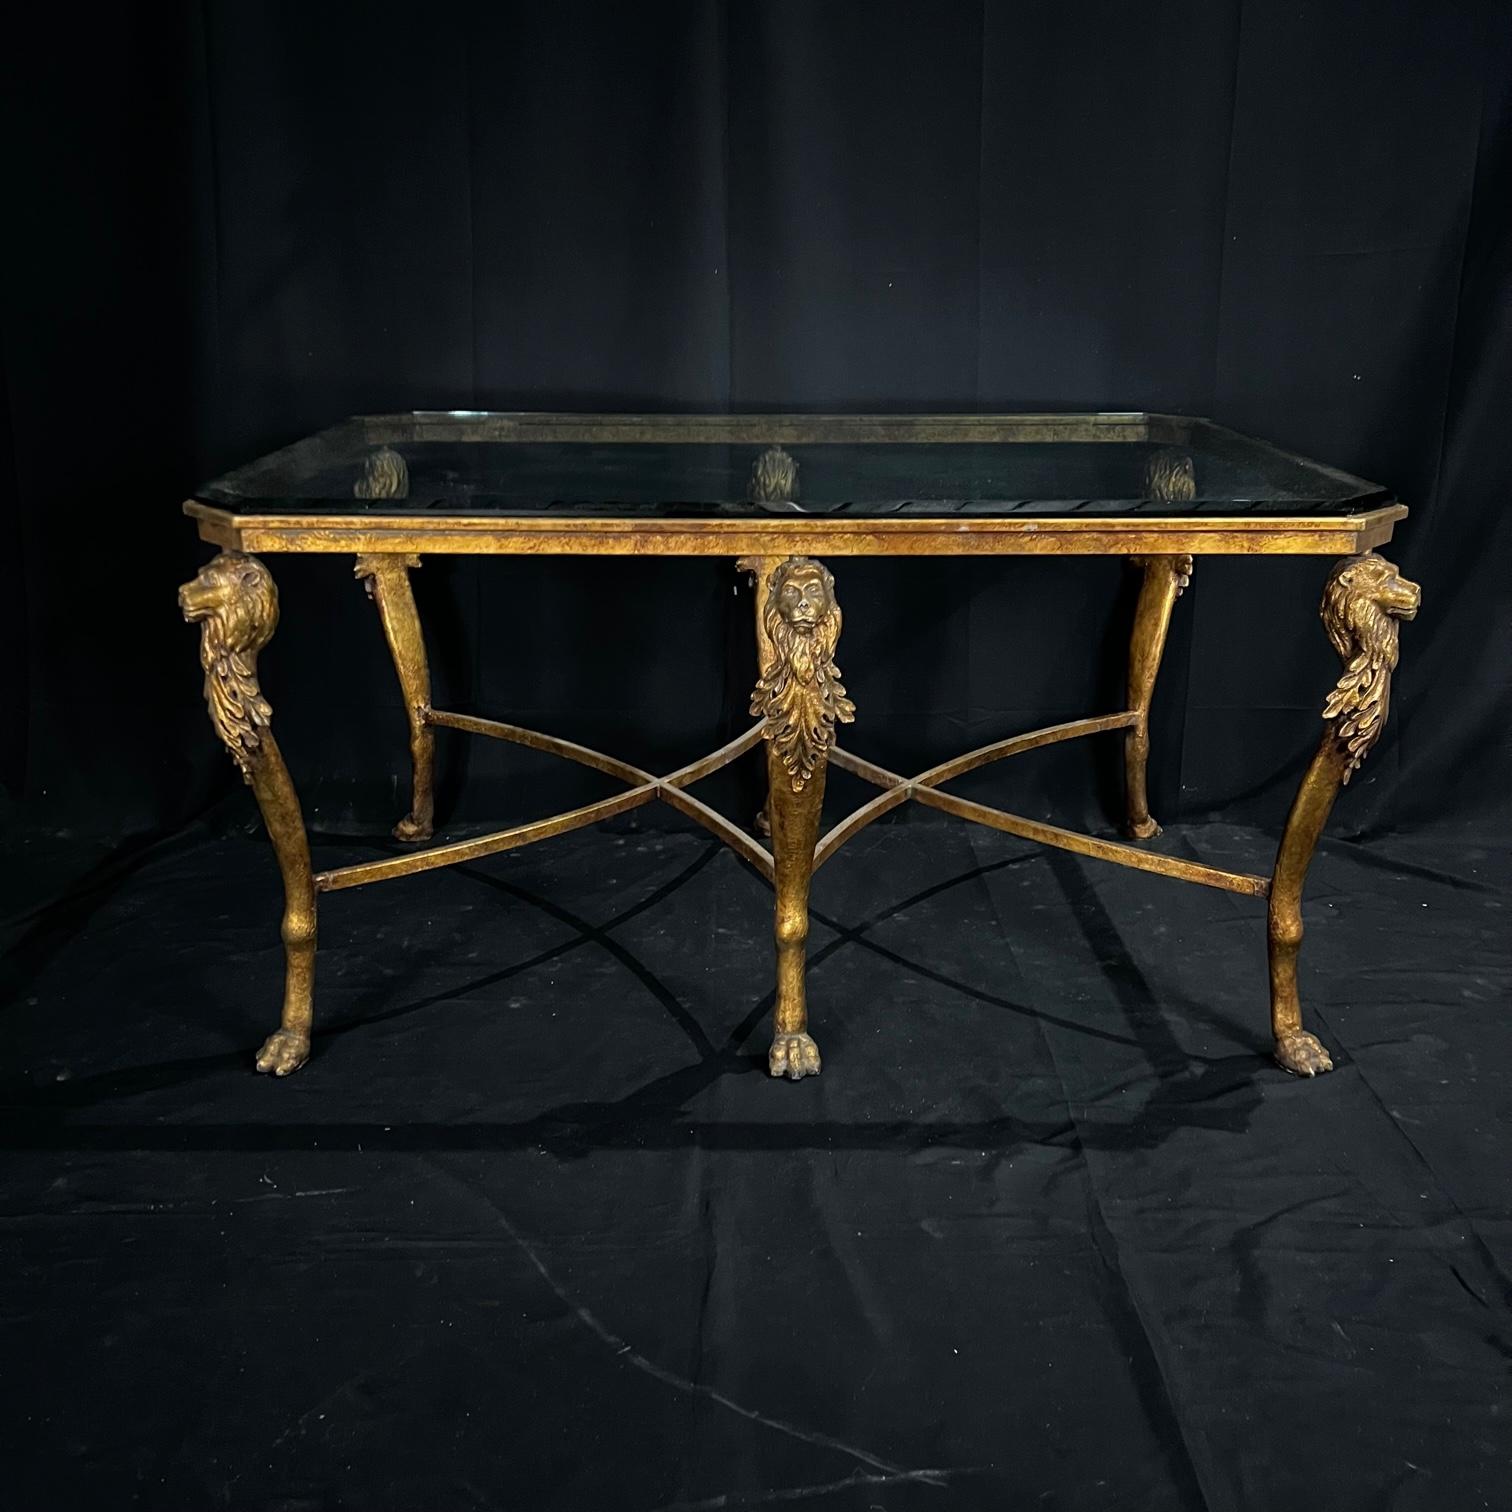 Very high quality neoclassical Italian lion’s head table with beveled glass top. Great size for a sofa table or side table.
#3121